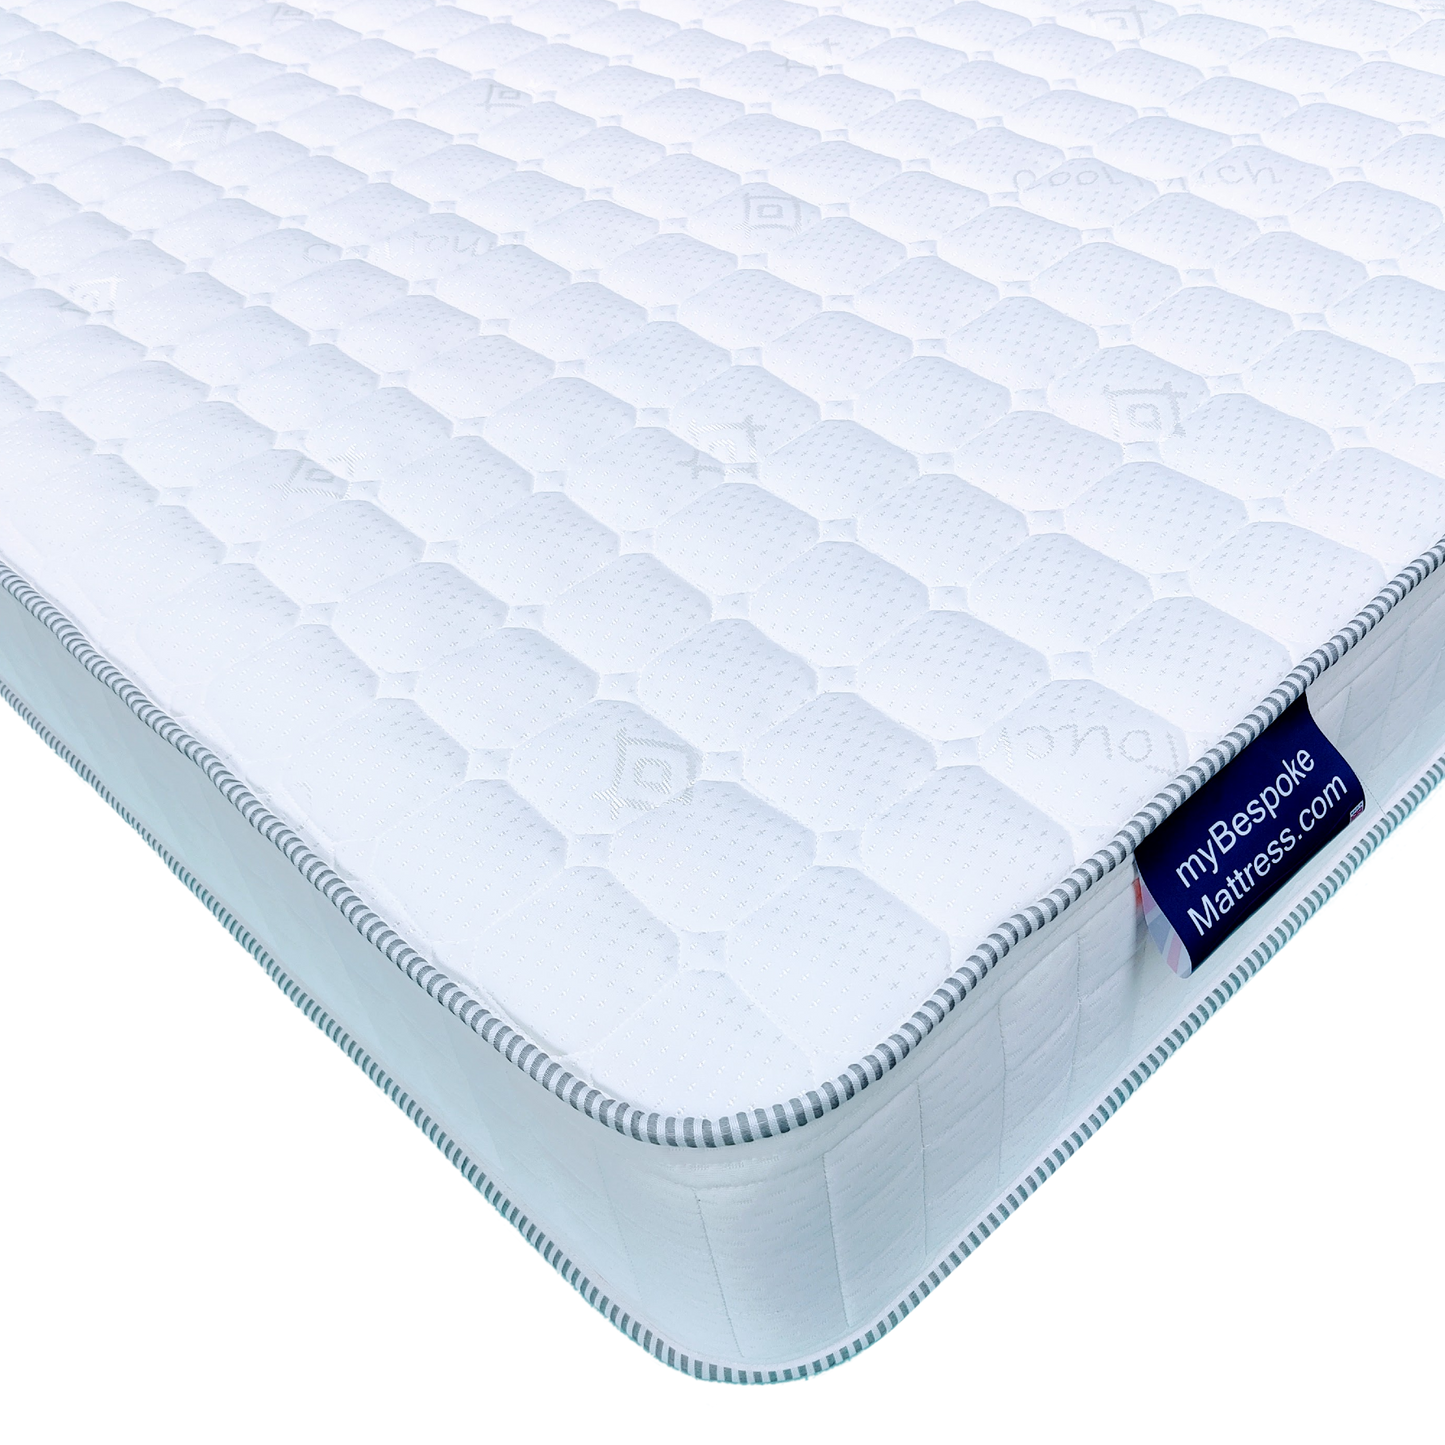 Mattress with Offside Angled Cut